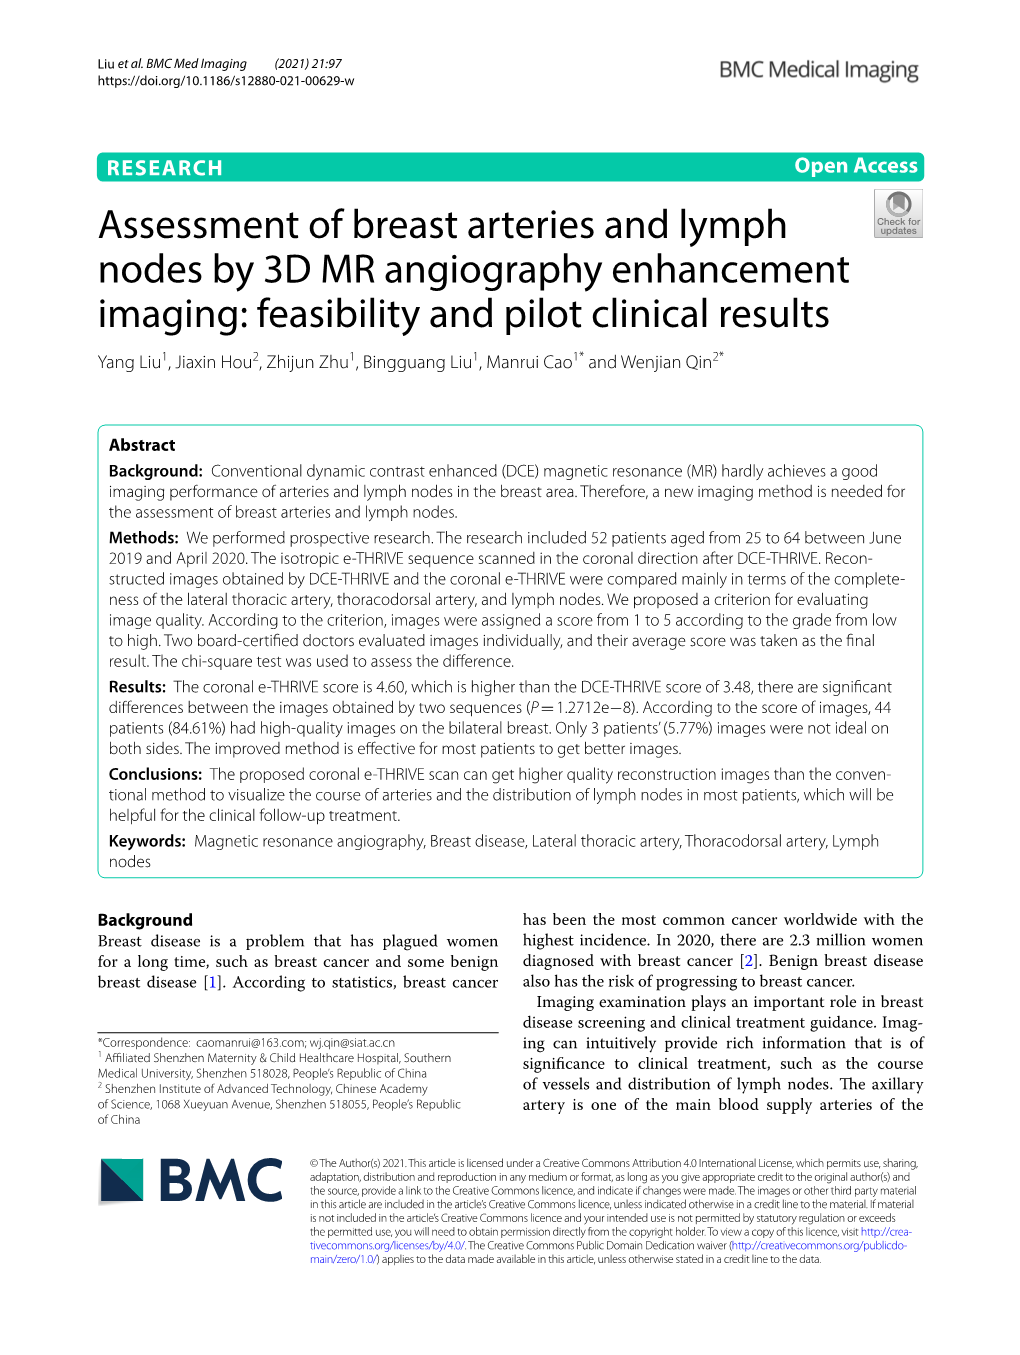 Assessment of Breast Arteries and Lymph